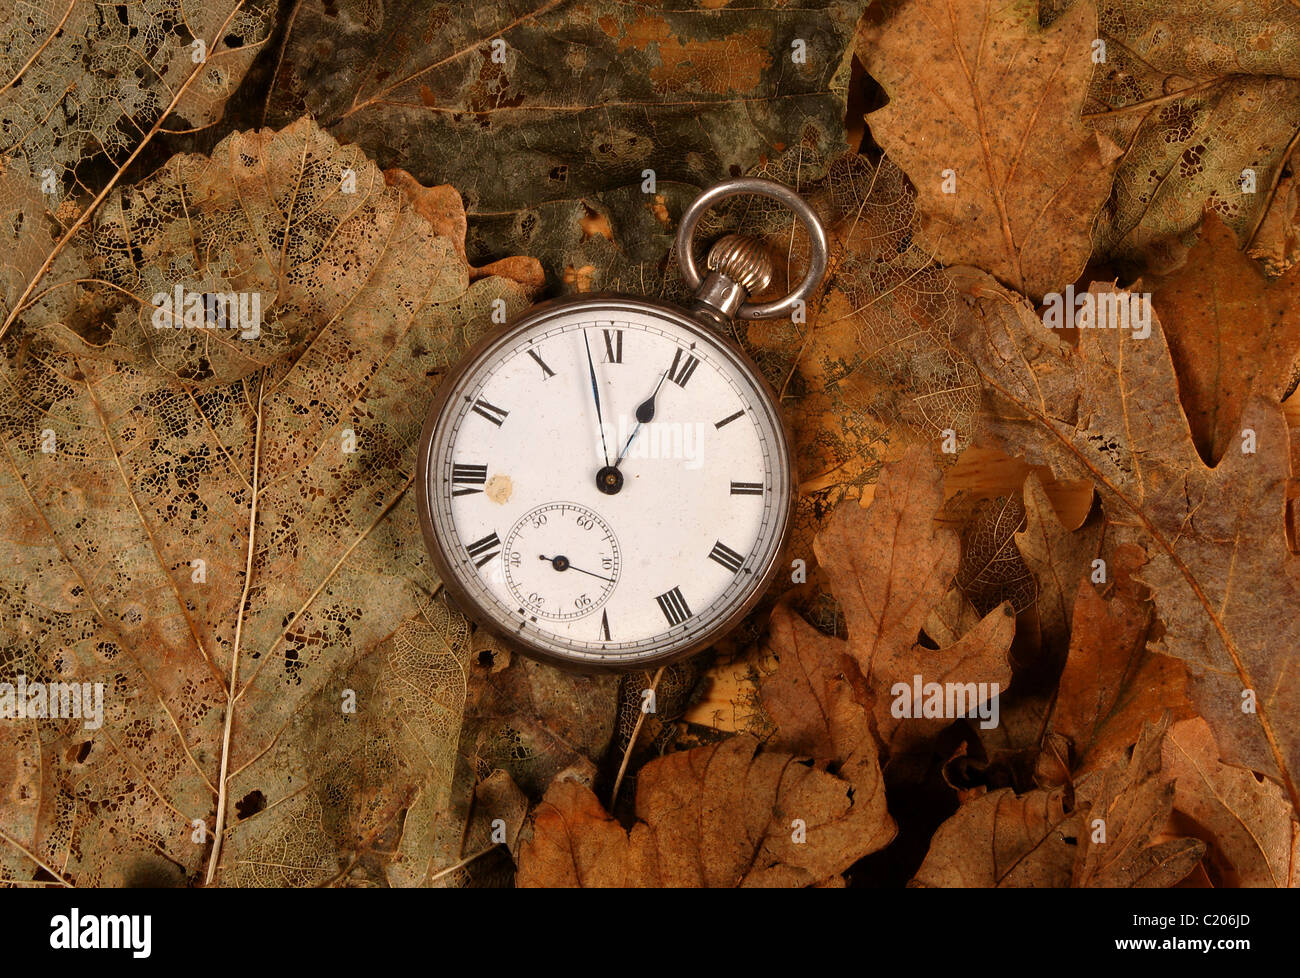 Antique pocket watch on dead leaves Stock Photo